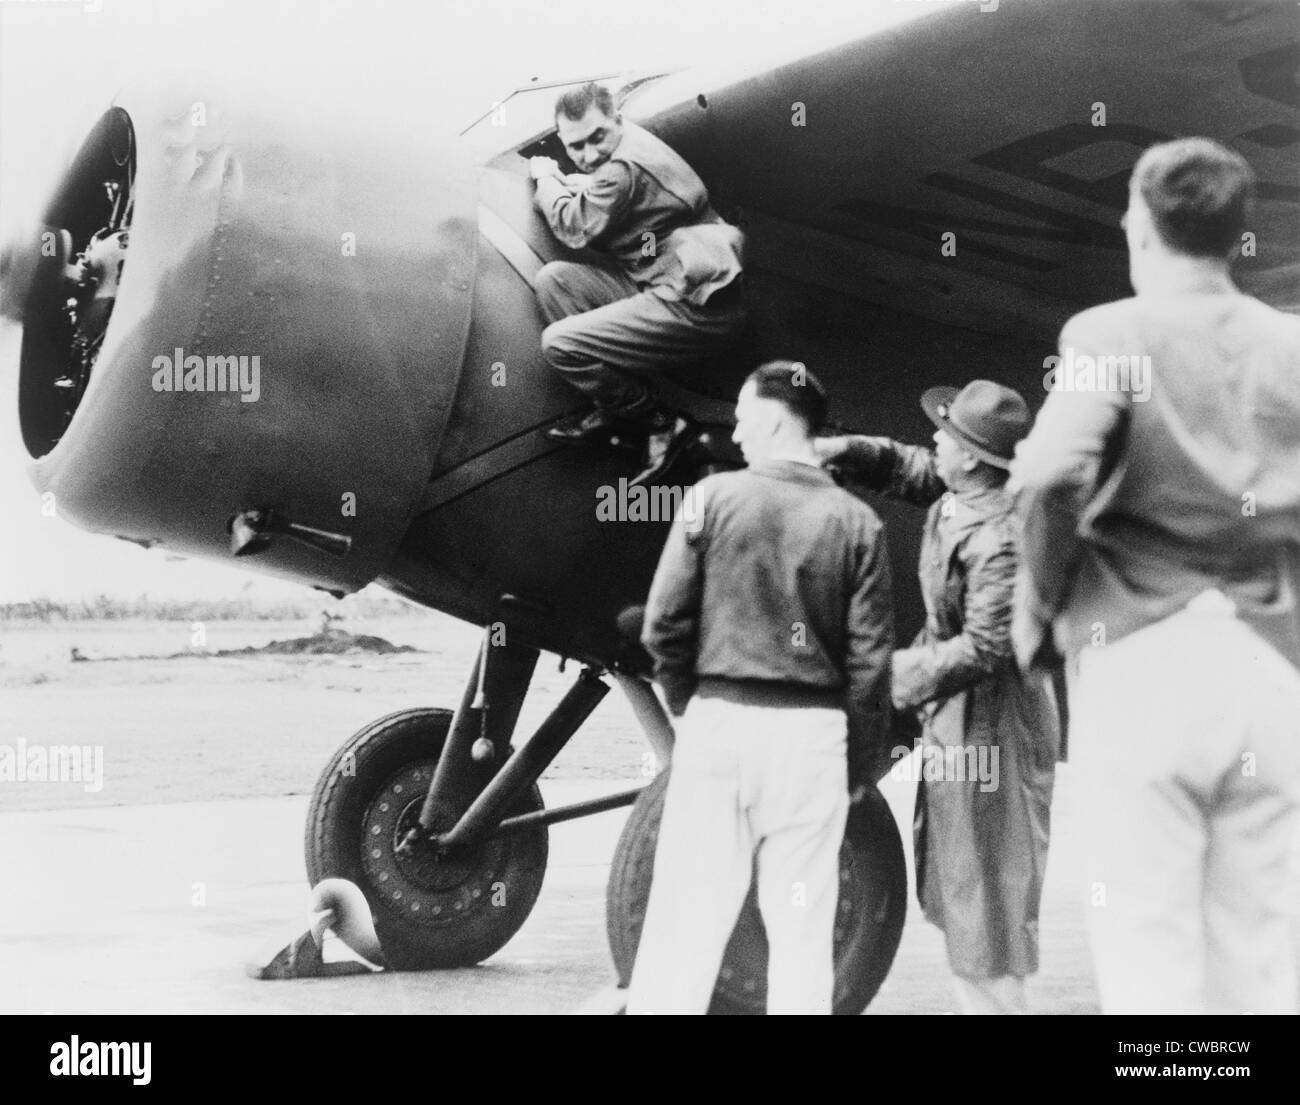 Paul Mantz, stunt pilot and air racer, served as Amelia Earhart's technician for her Hawaii to Oakland flight, climbing down Stock Photo